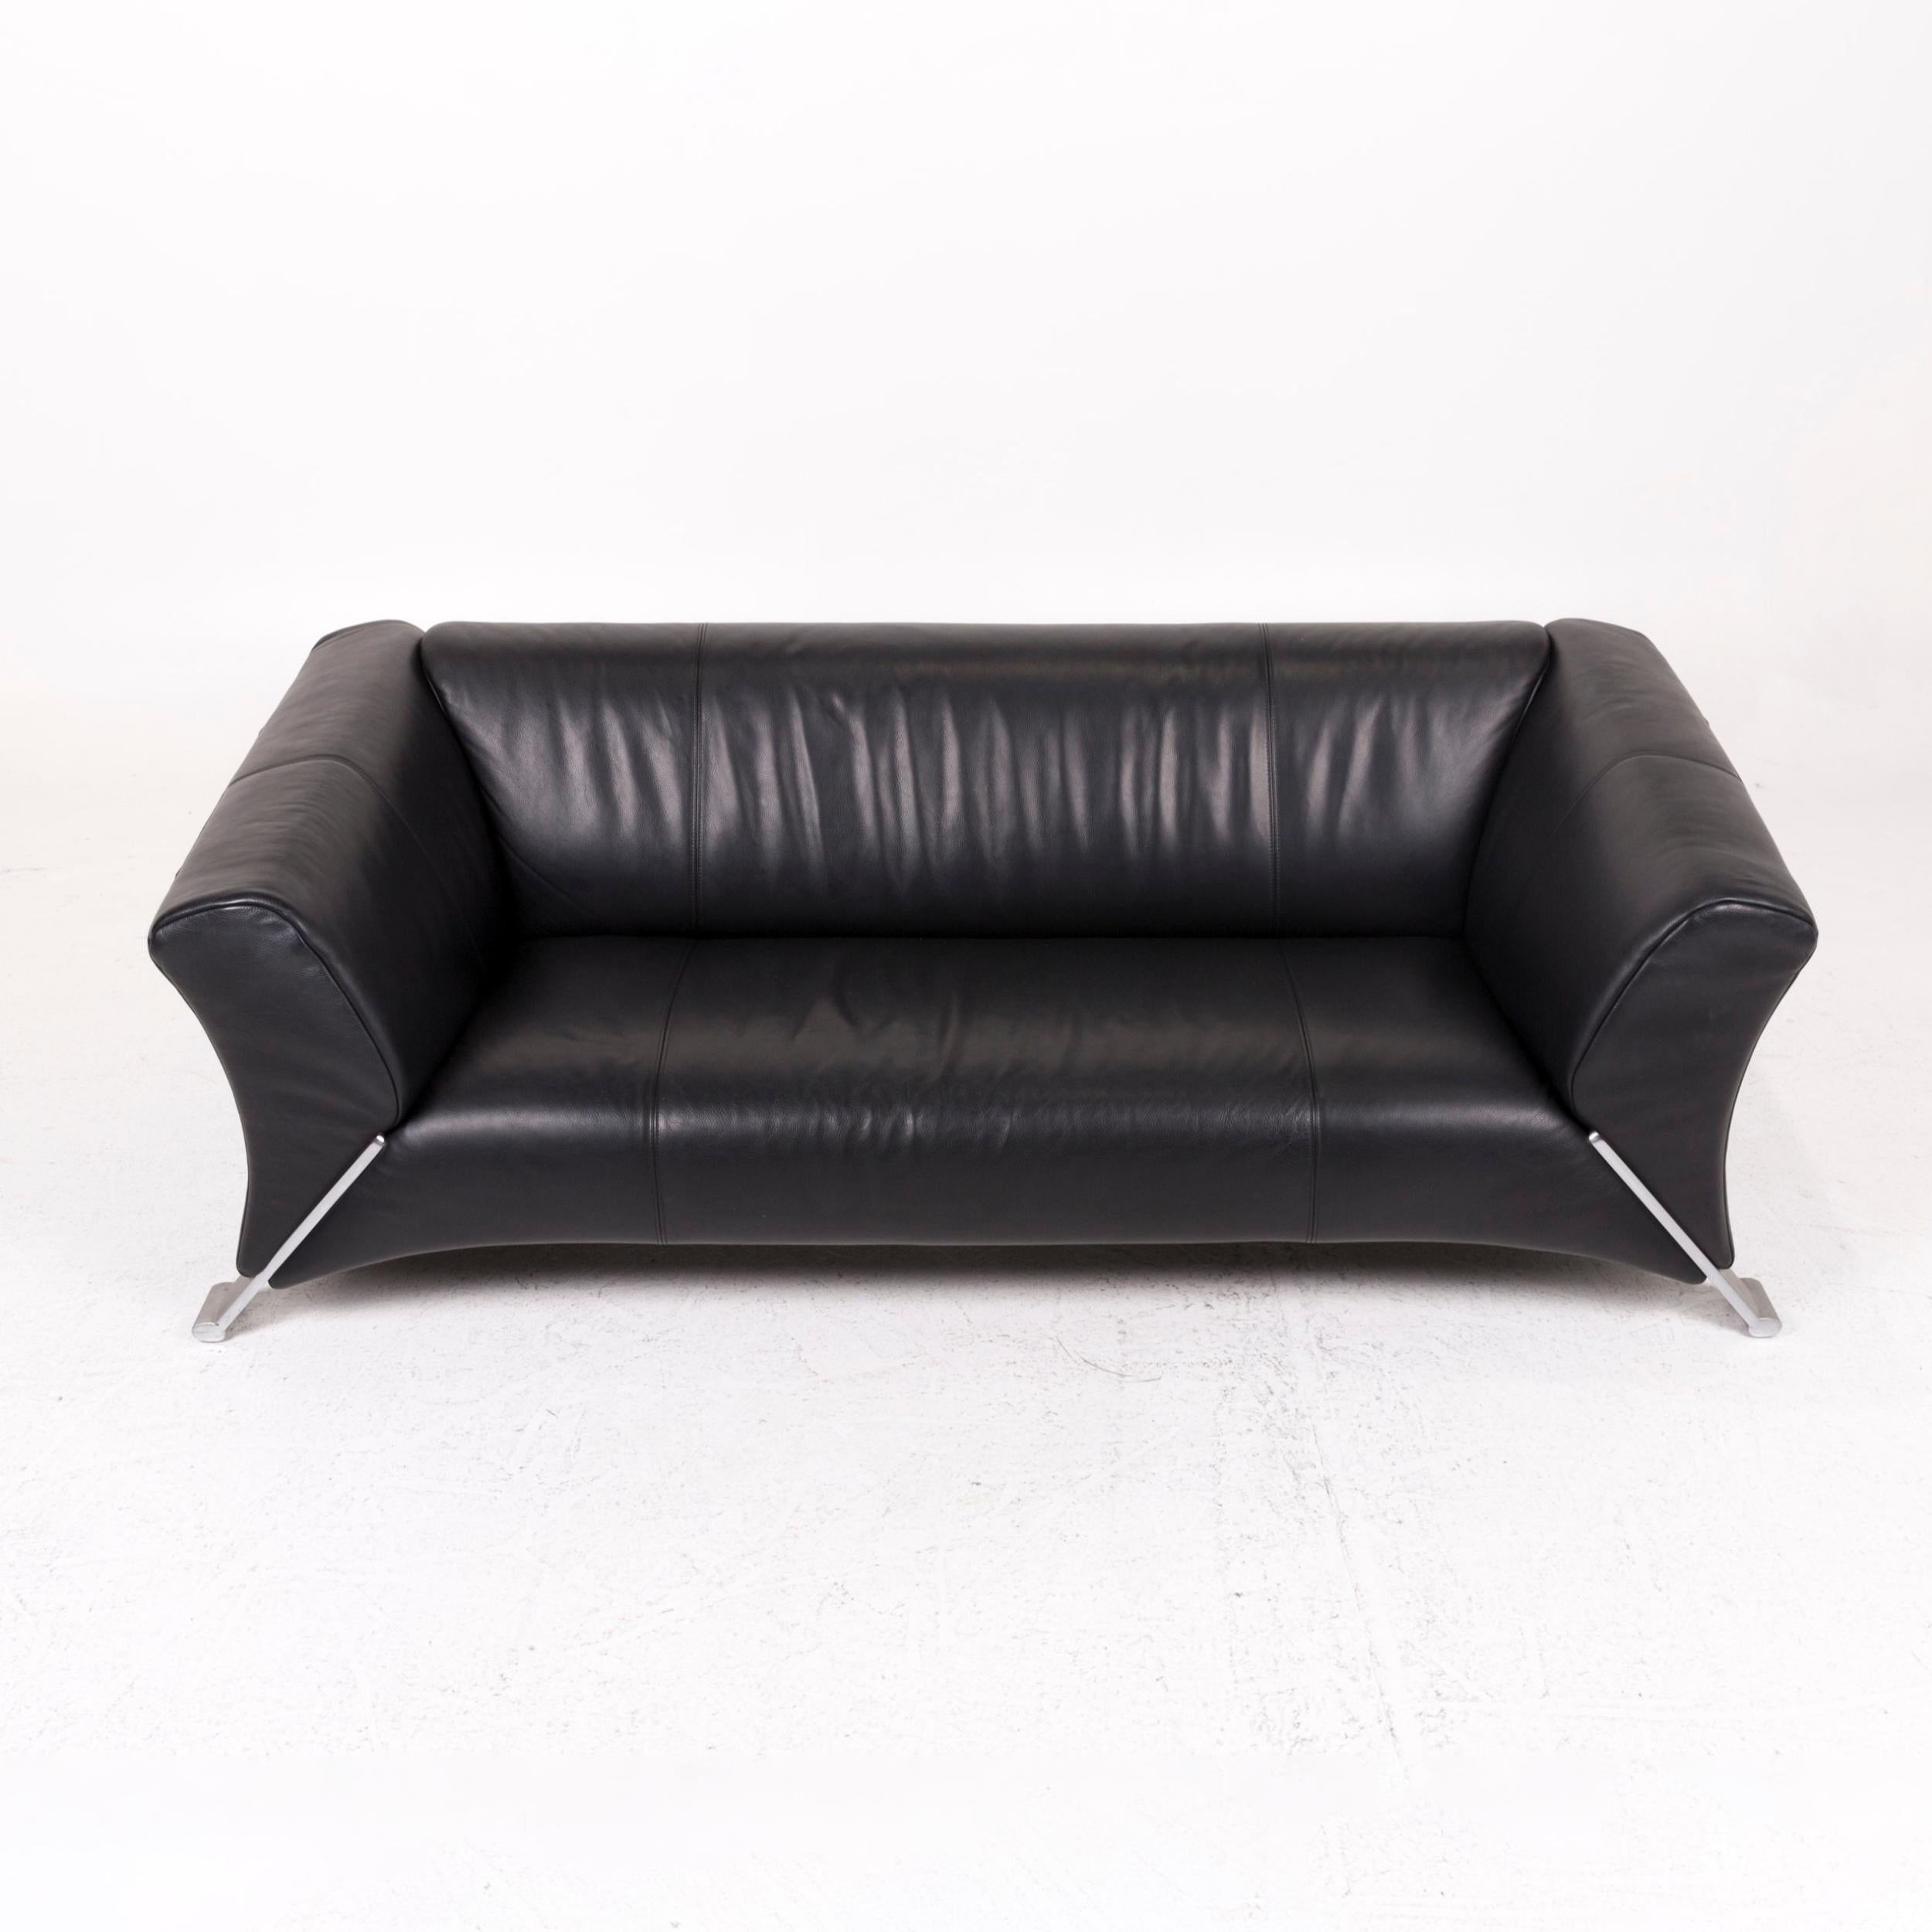 Rolf Benz 322 Leather Sofa Black Three-Seat Couch 1